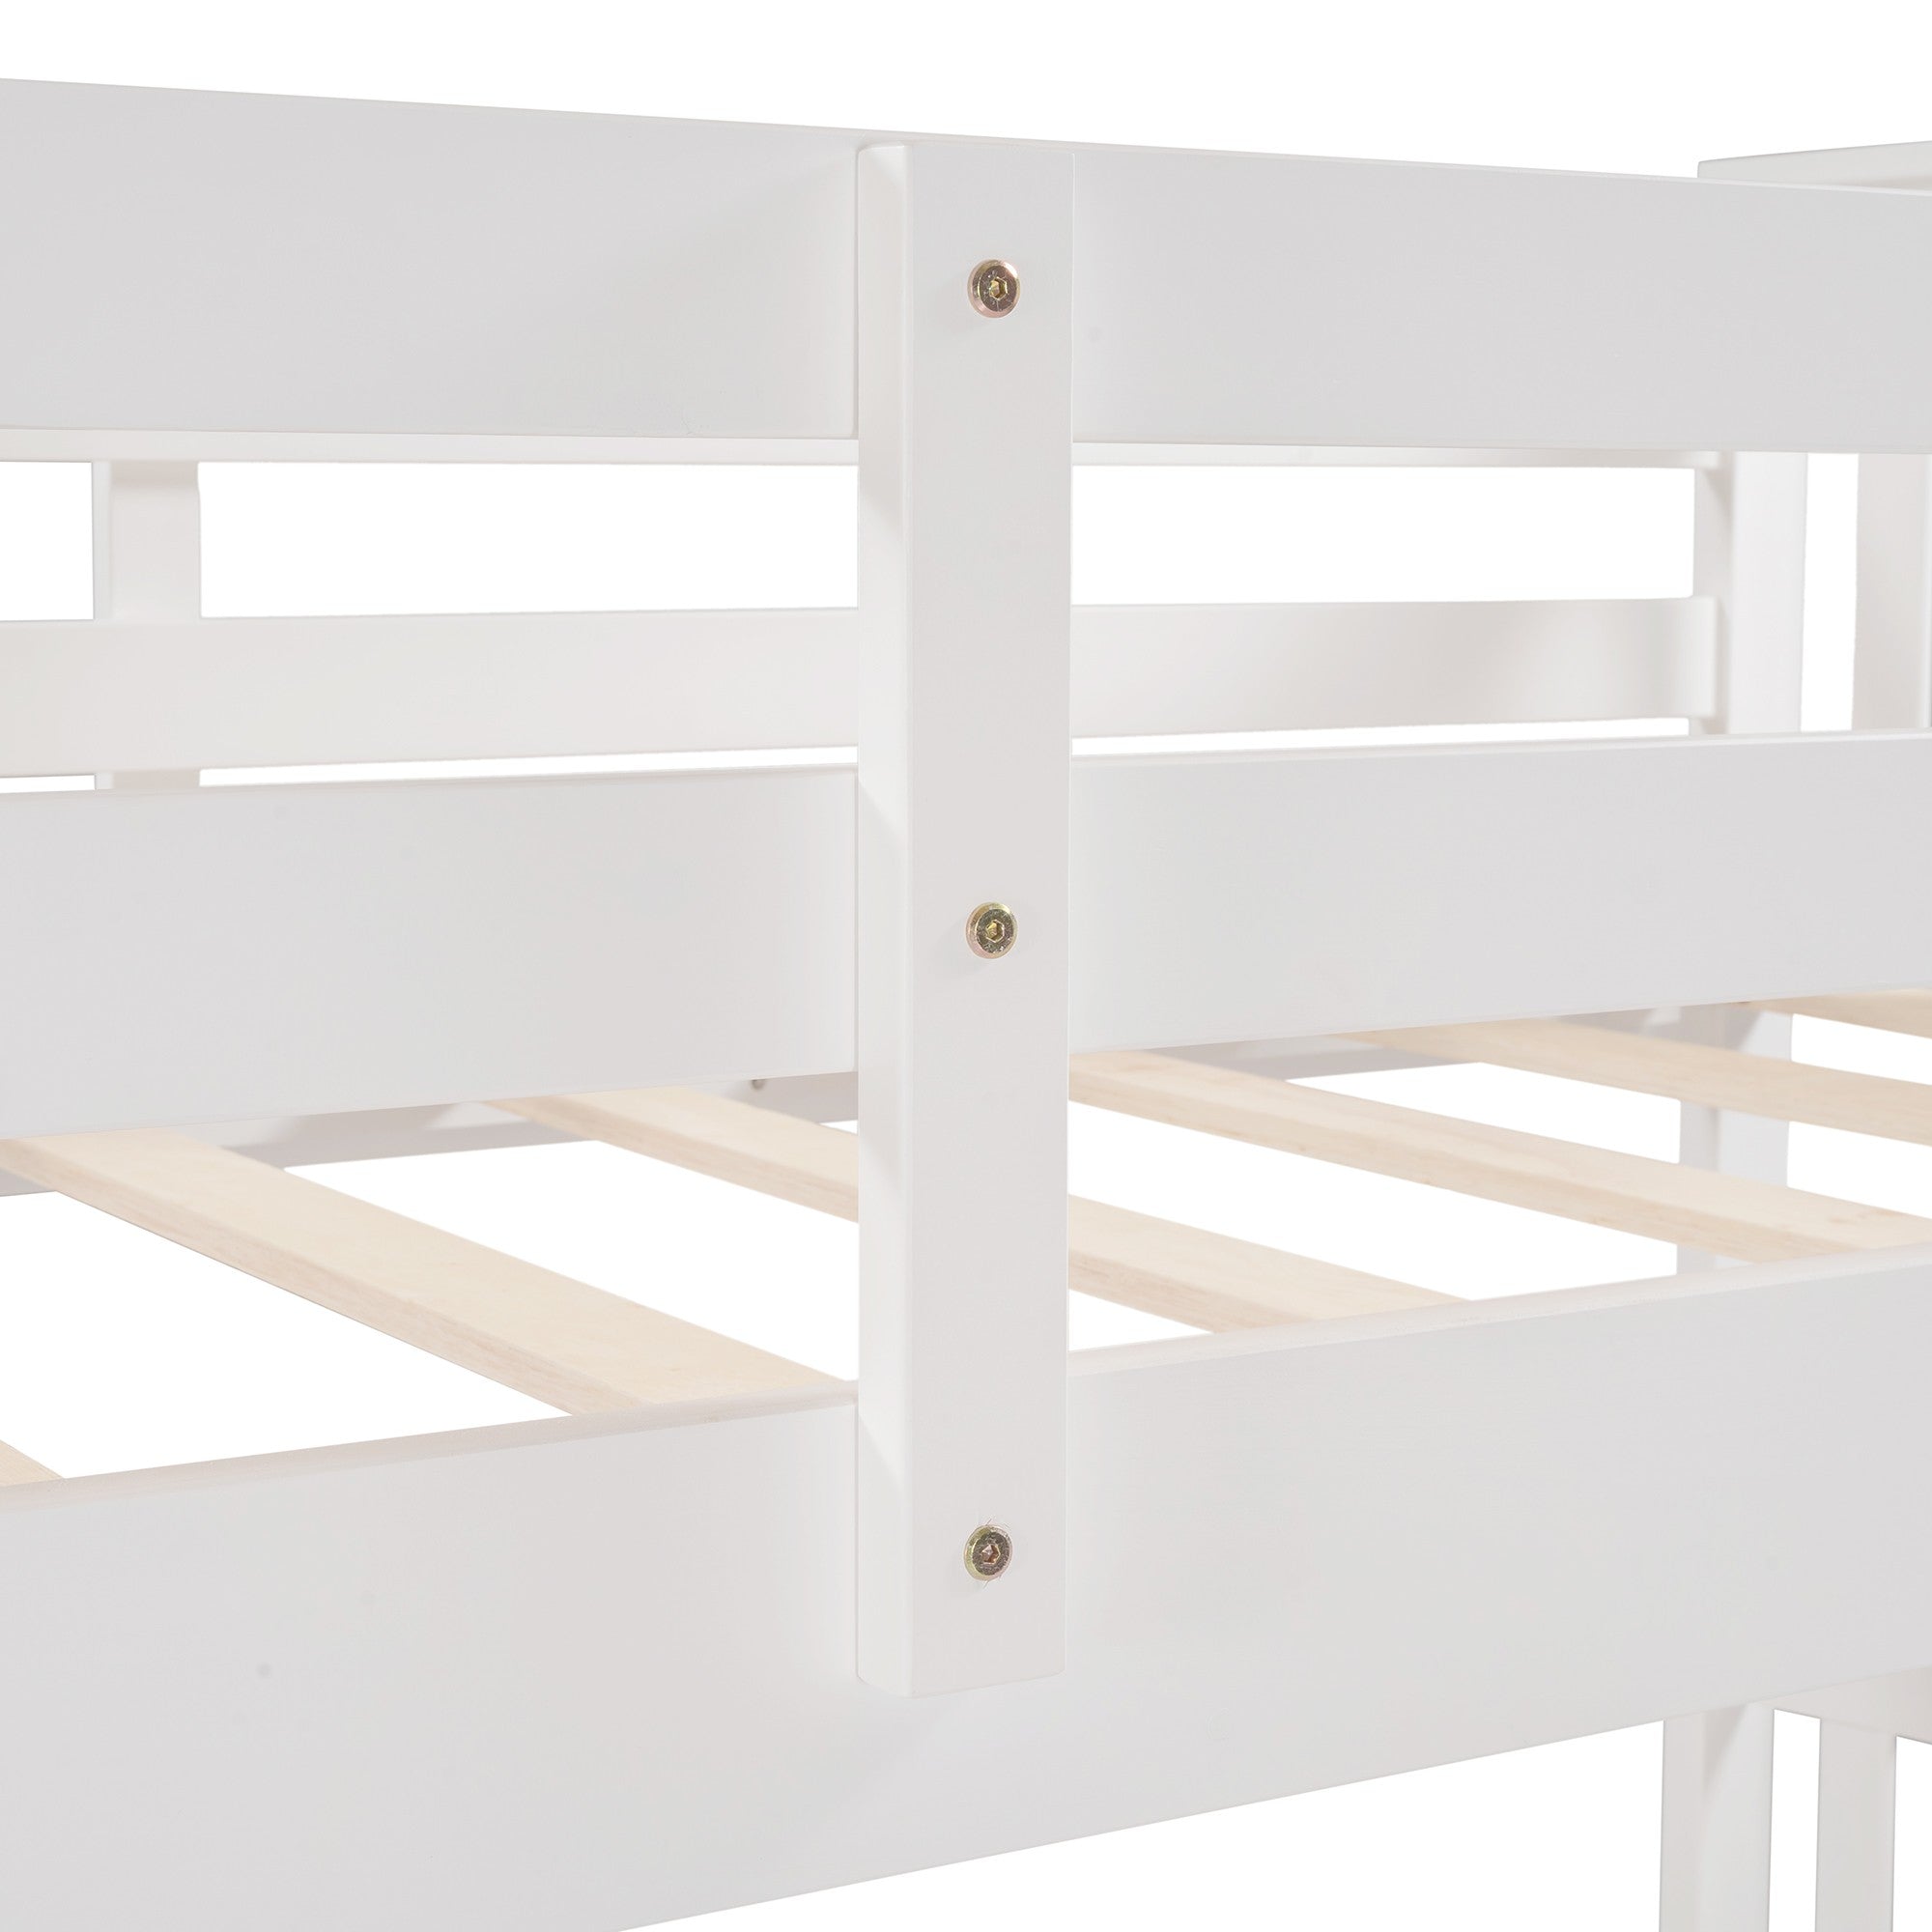 White Double Twin Size Ladder Bunk Bed With Drawers